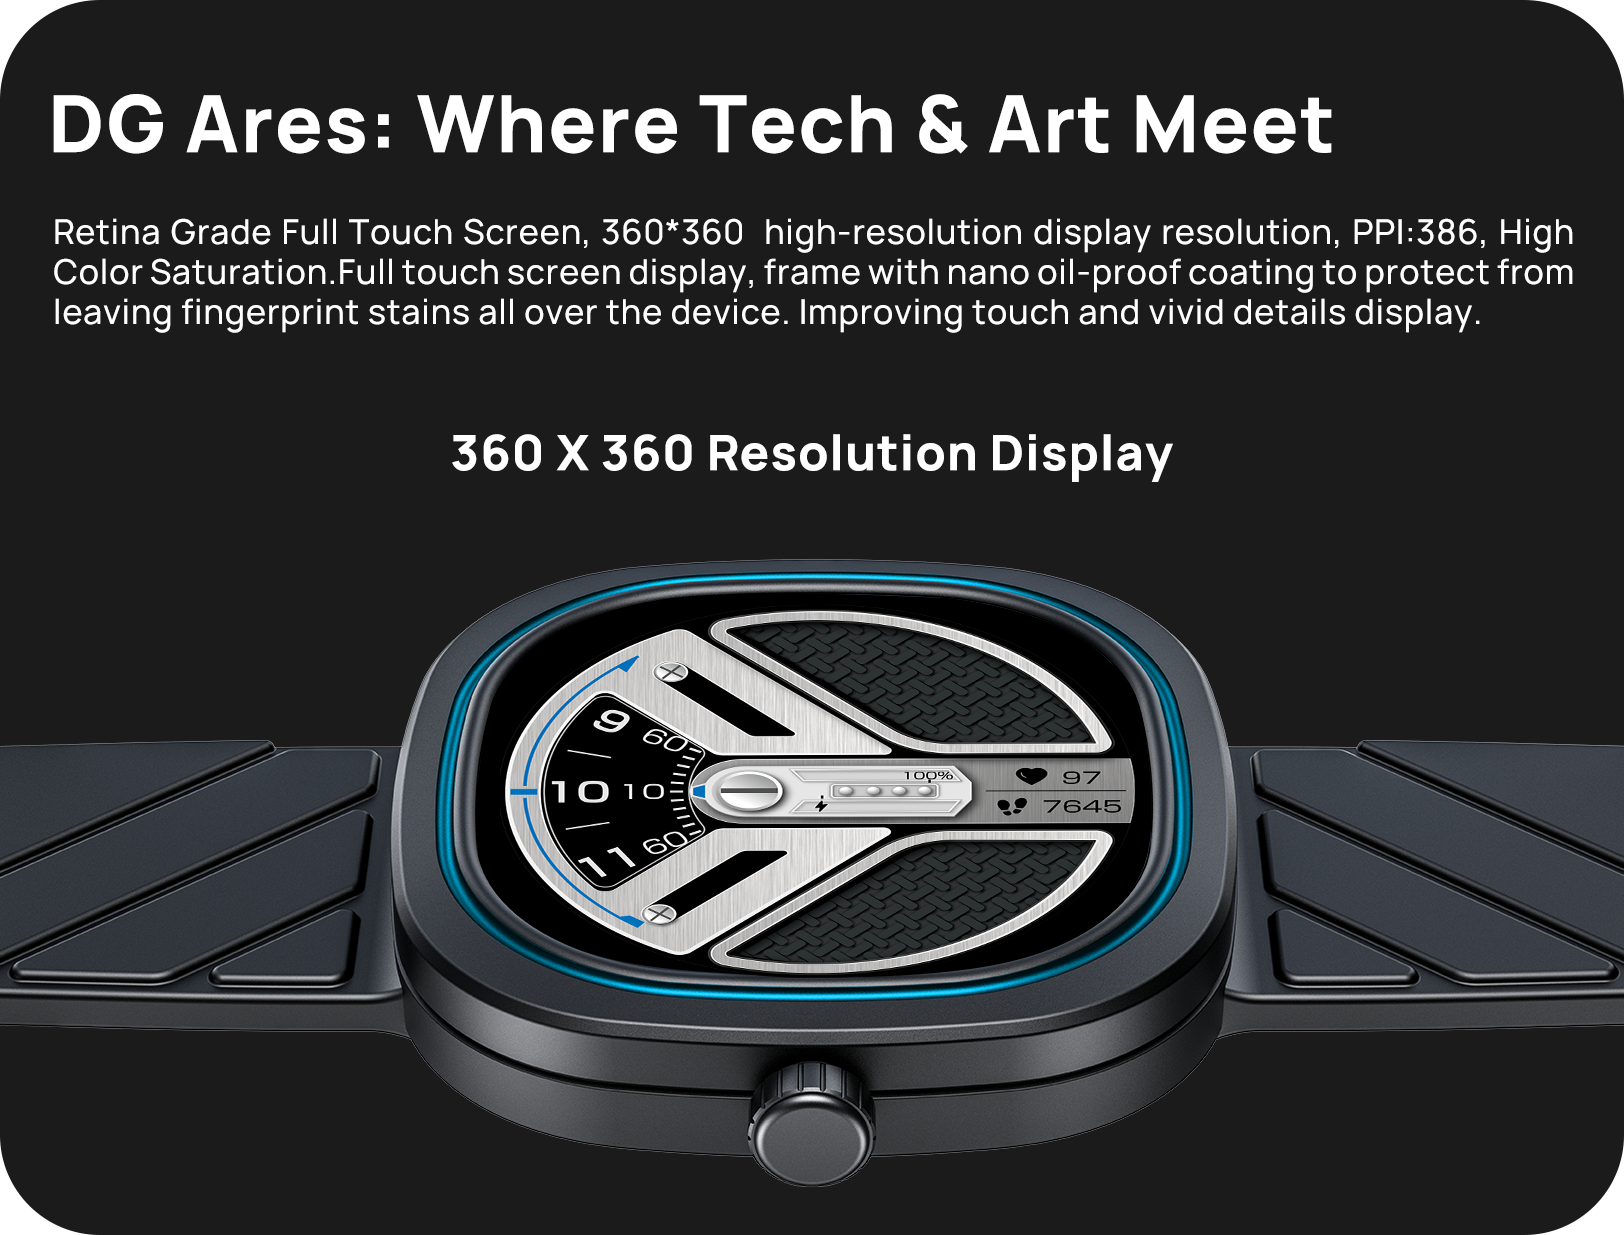  Comes with a 360x360 high resolution display, PPI: 386 | Doogee DG Ares